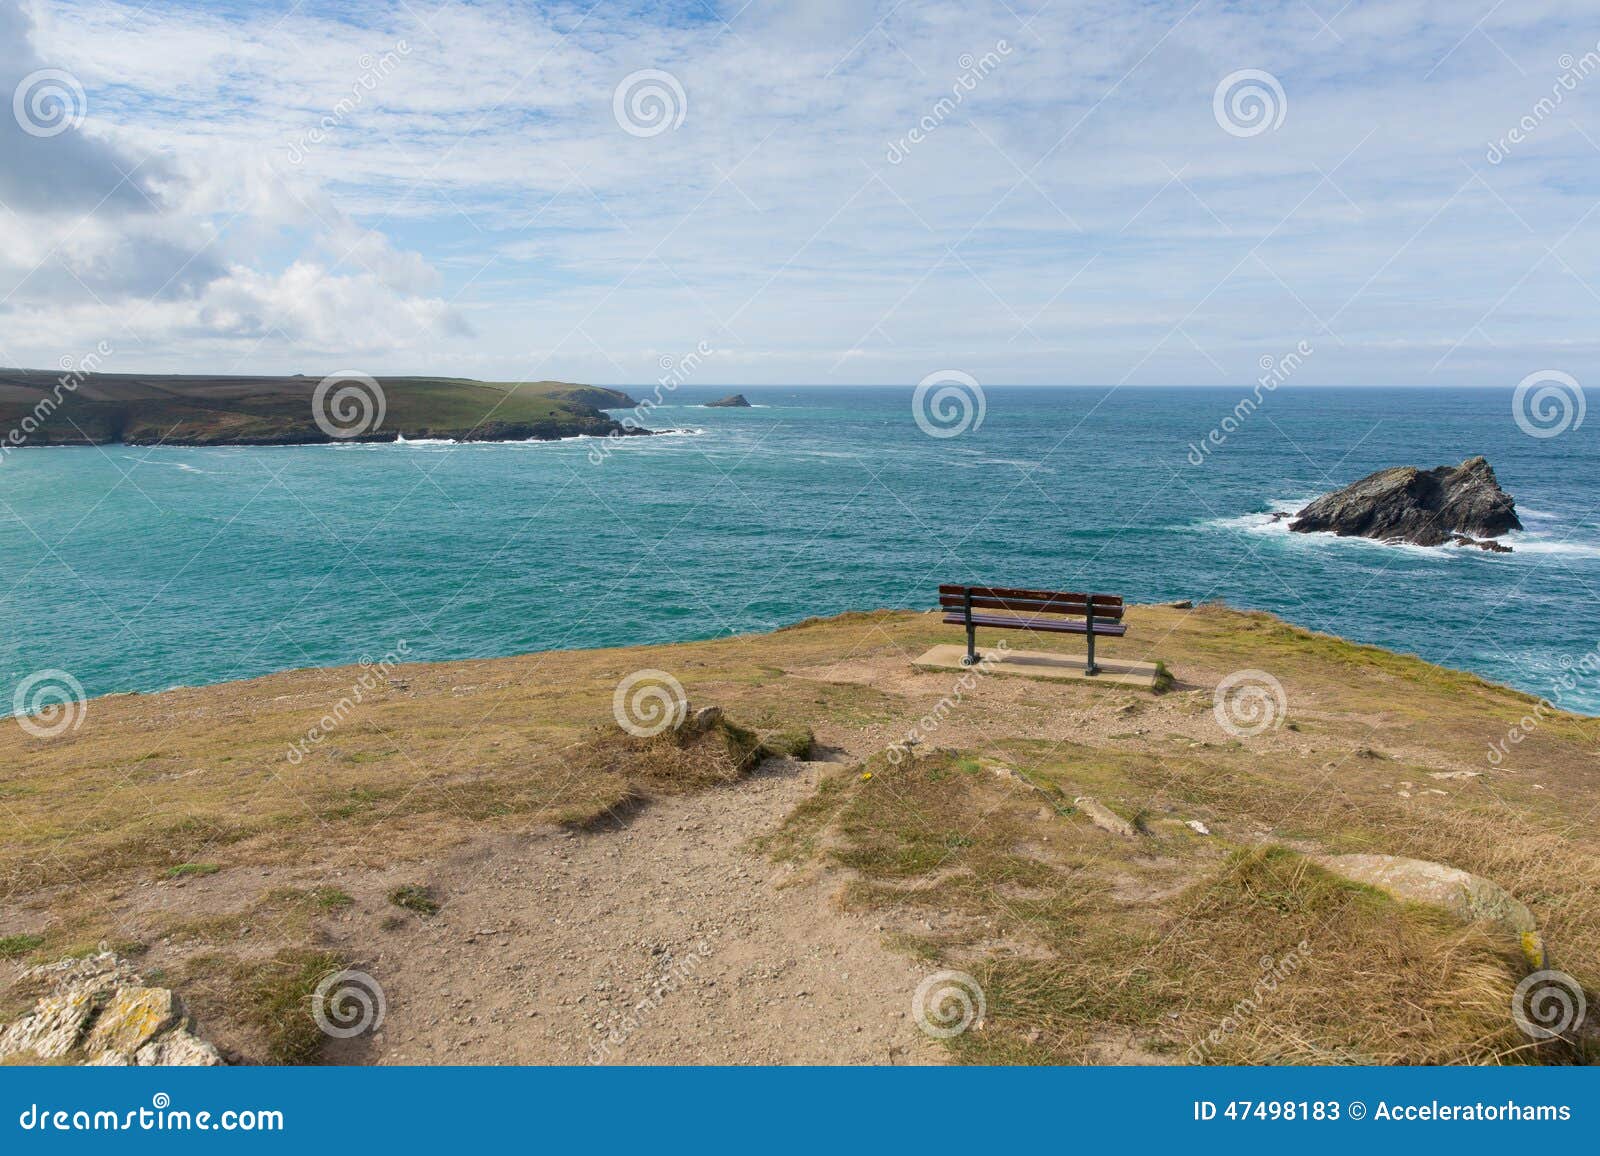 View from headland at Pentire Newquay Cornwall England UK by Crantock Bay with blue sea